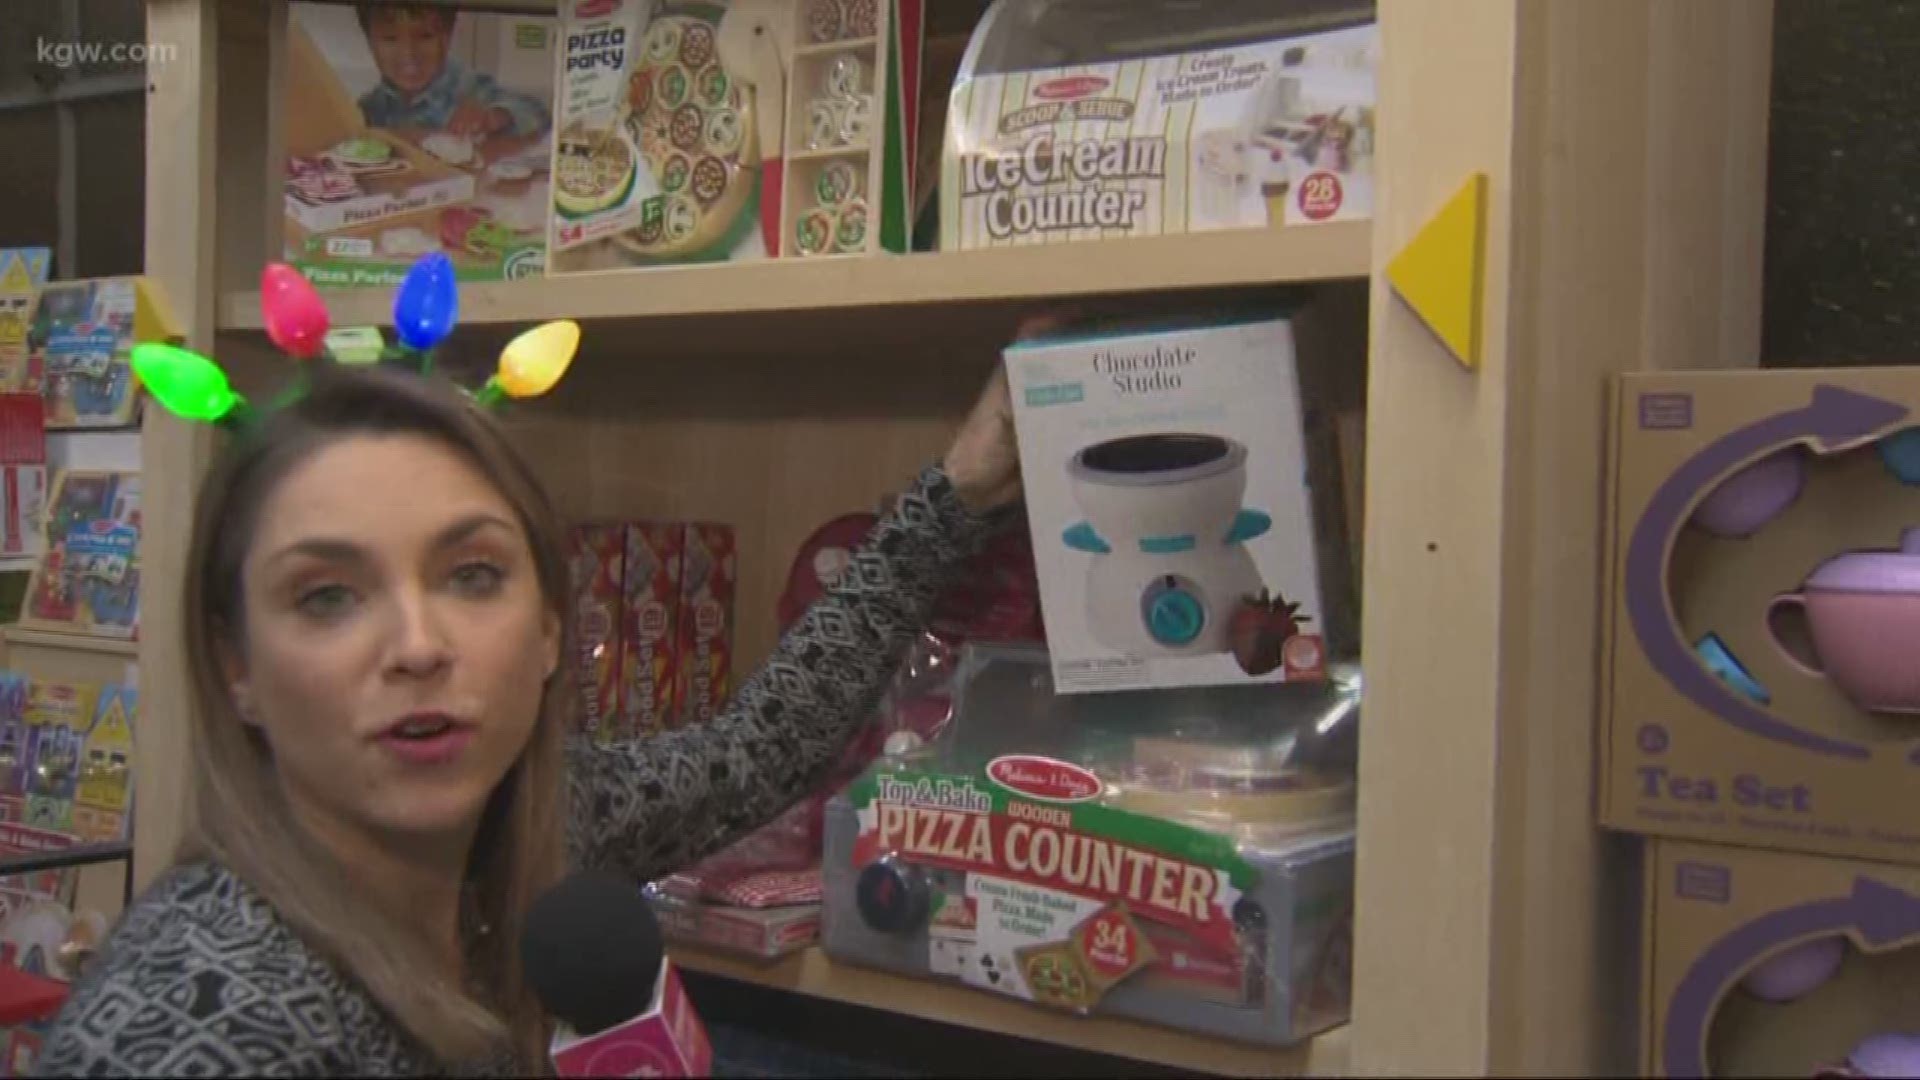 It's the final week of the KGW Great Toy Drive, so Cassidy Quinn went to Thinker Toys in Multnomah Village, to do some toy shopping of her own.
#TonightWithCassidy